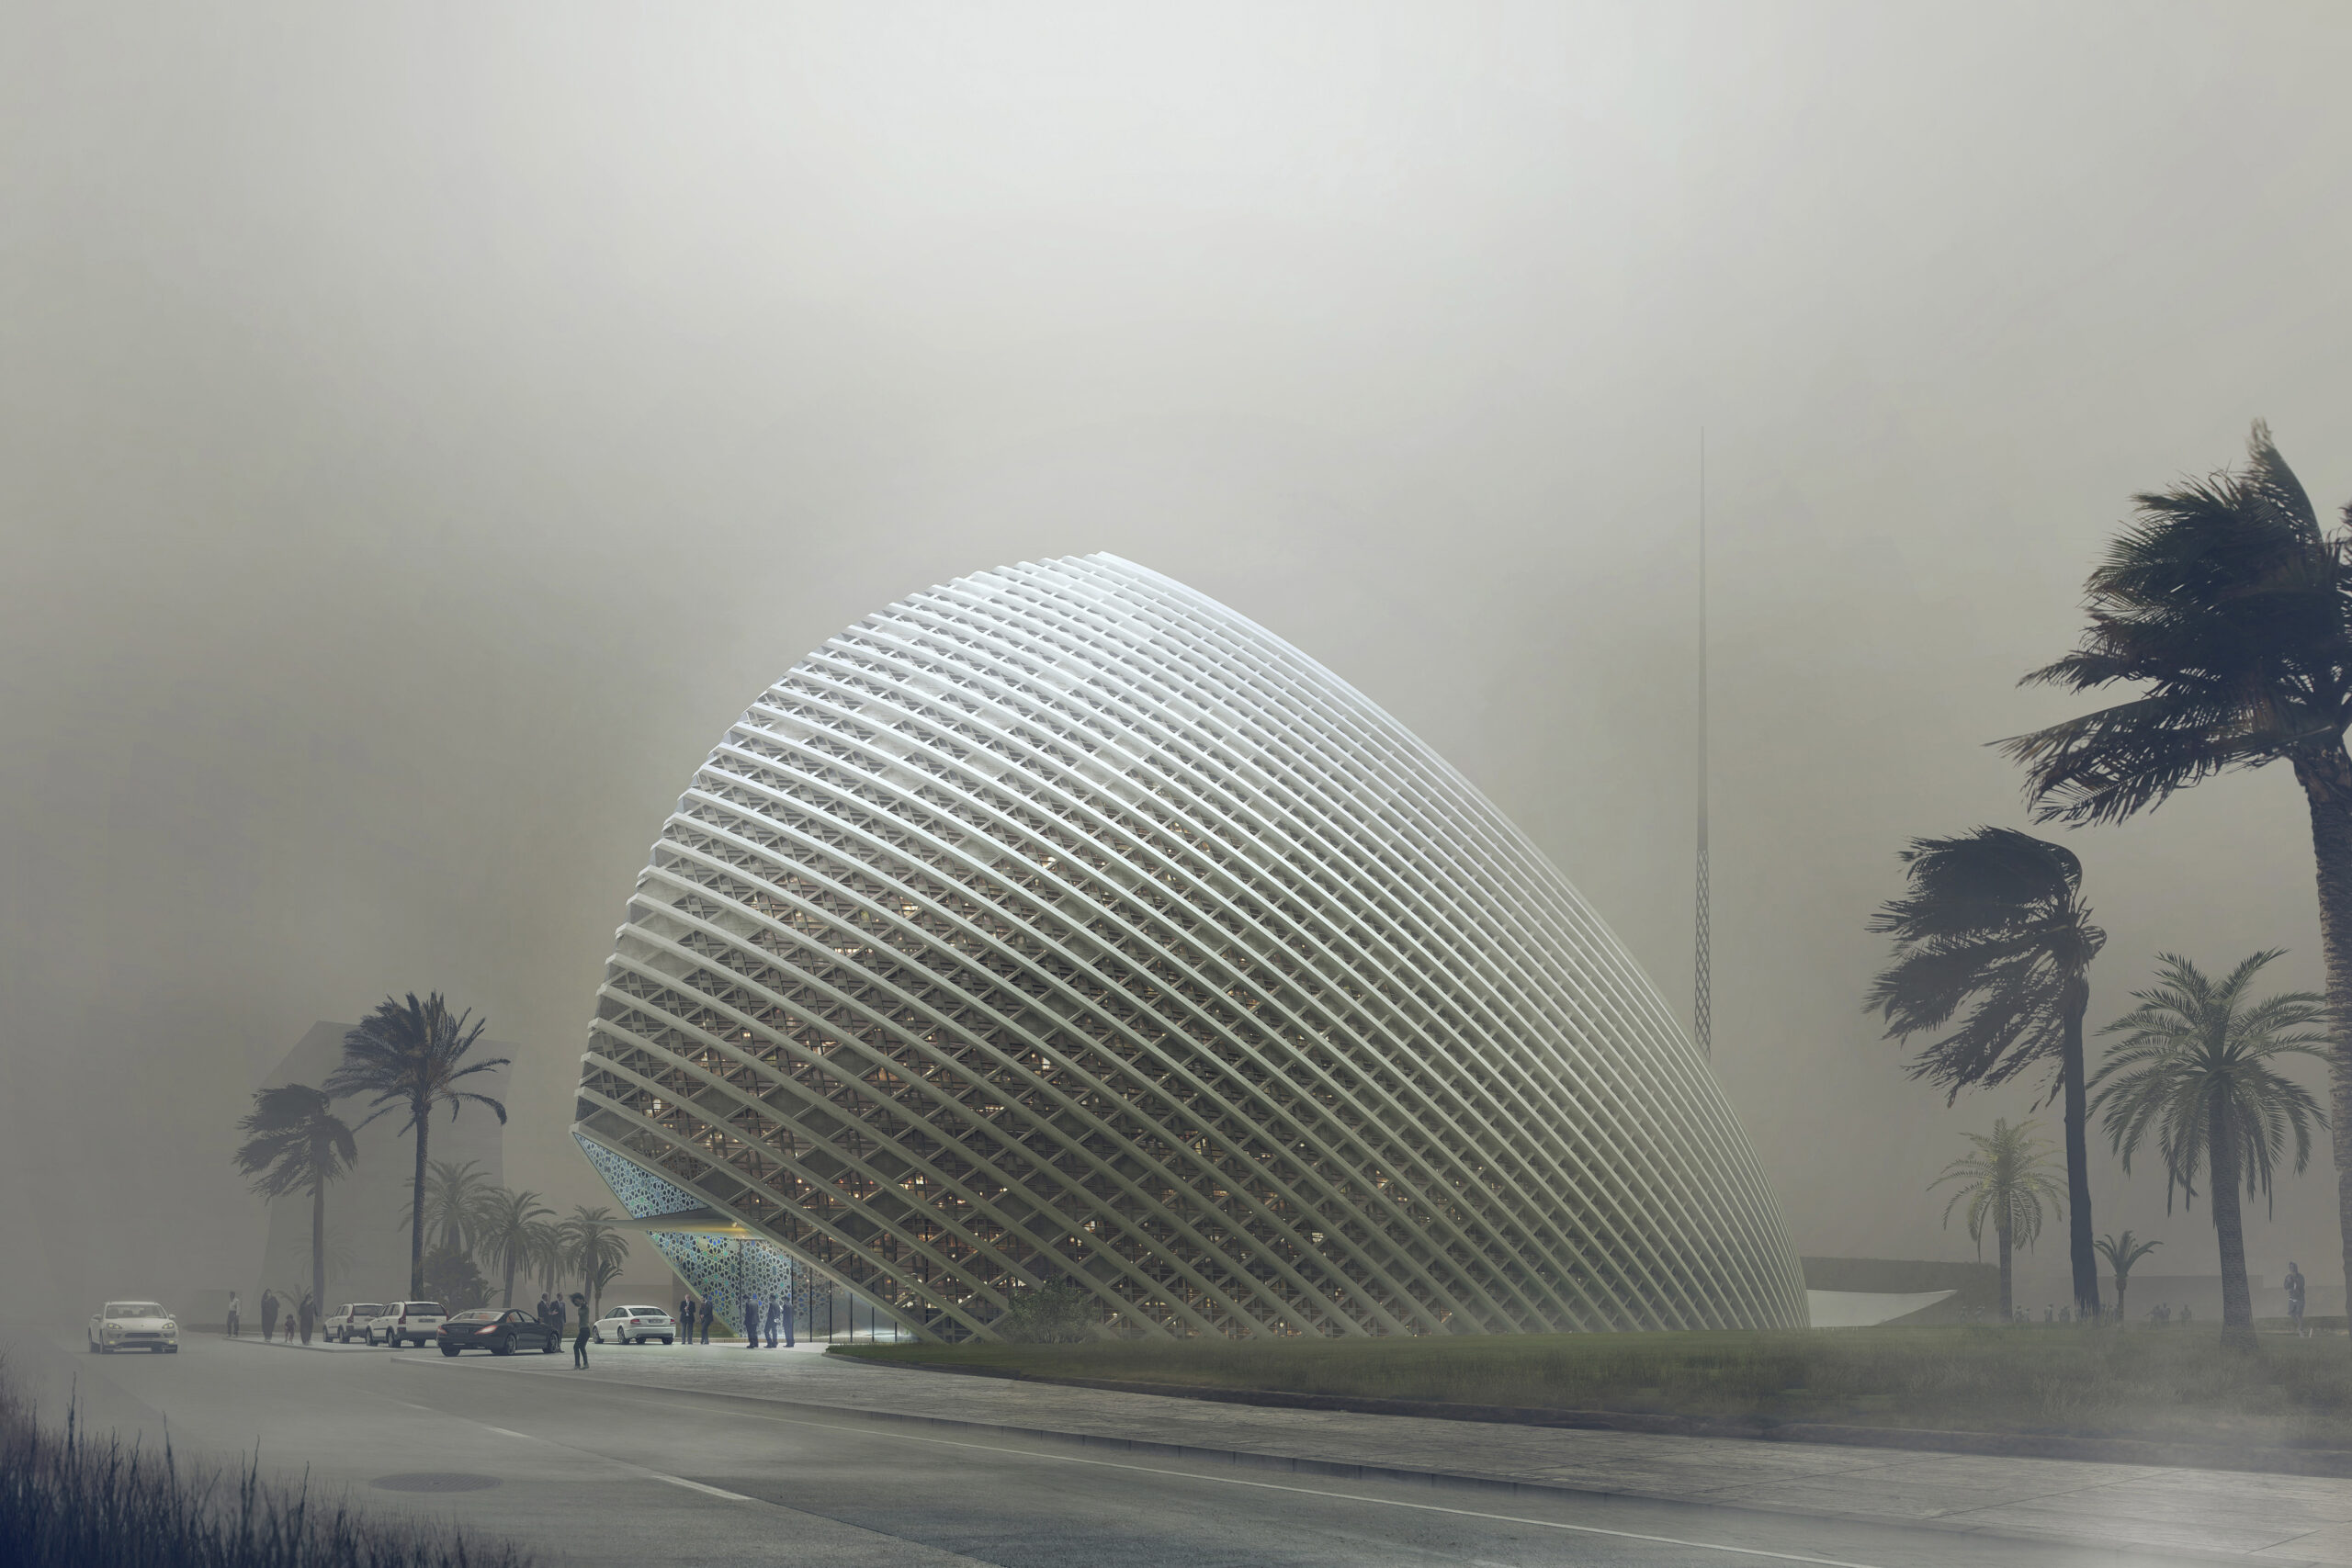 New Post and Telecommunications Authority Headquarters in Algiers by Mario Cucinella